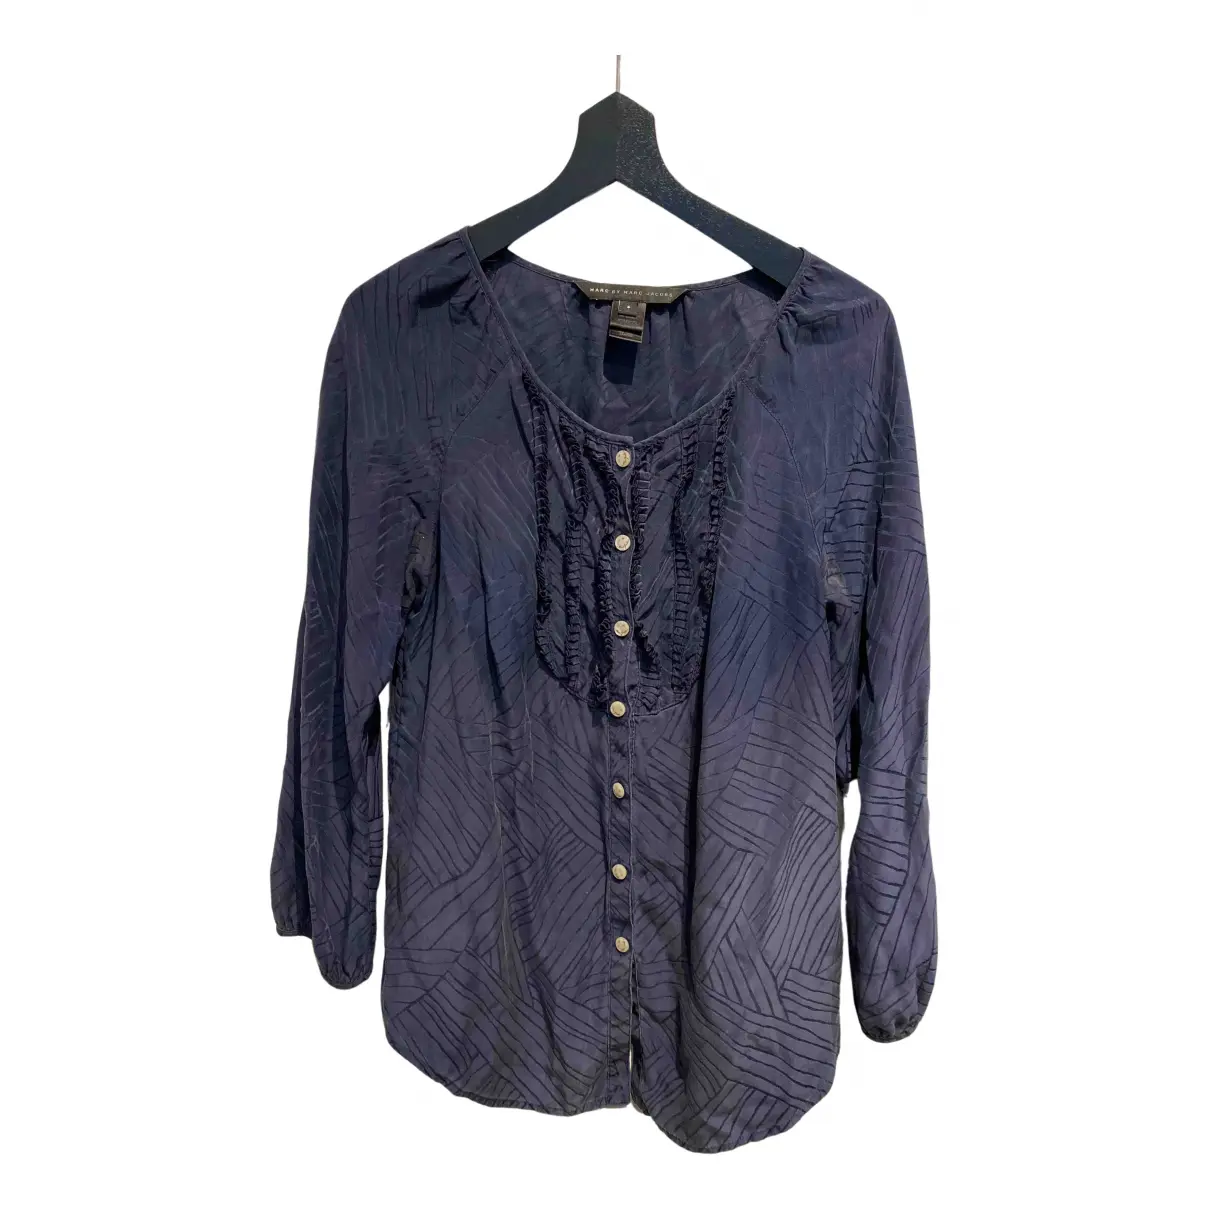 Silk blouse Marc by Marc Jacobs